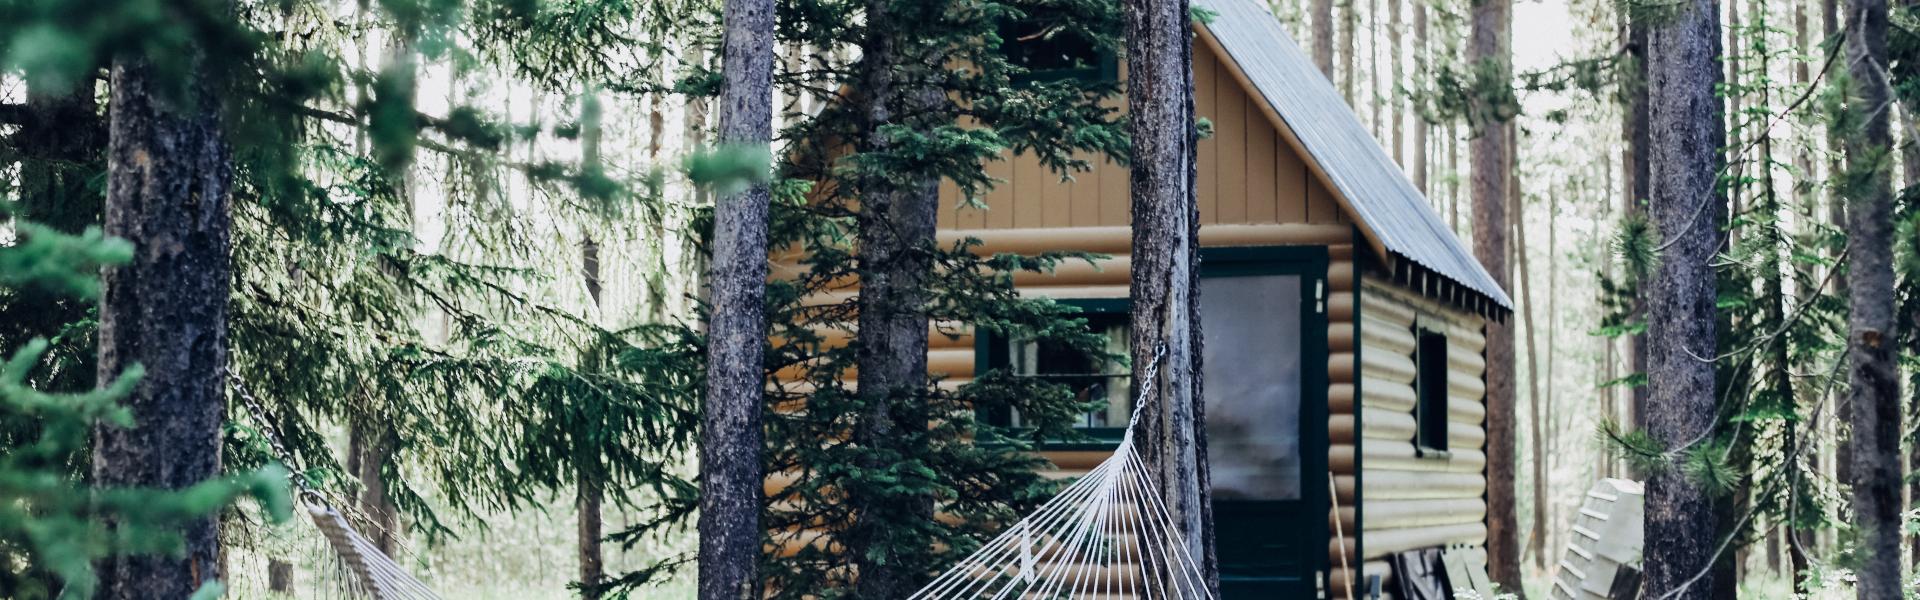 wooden house with hammock attached on tree